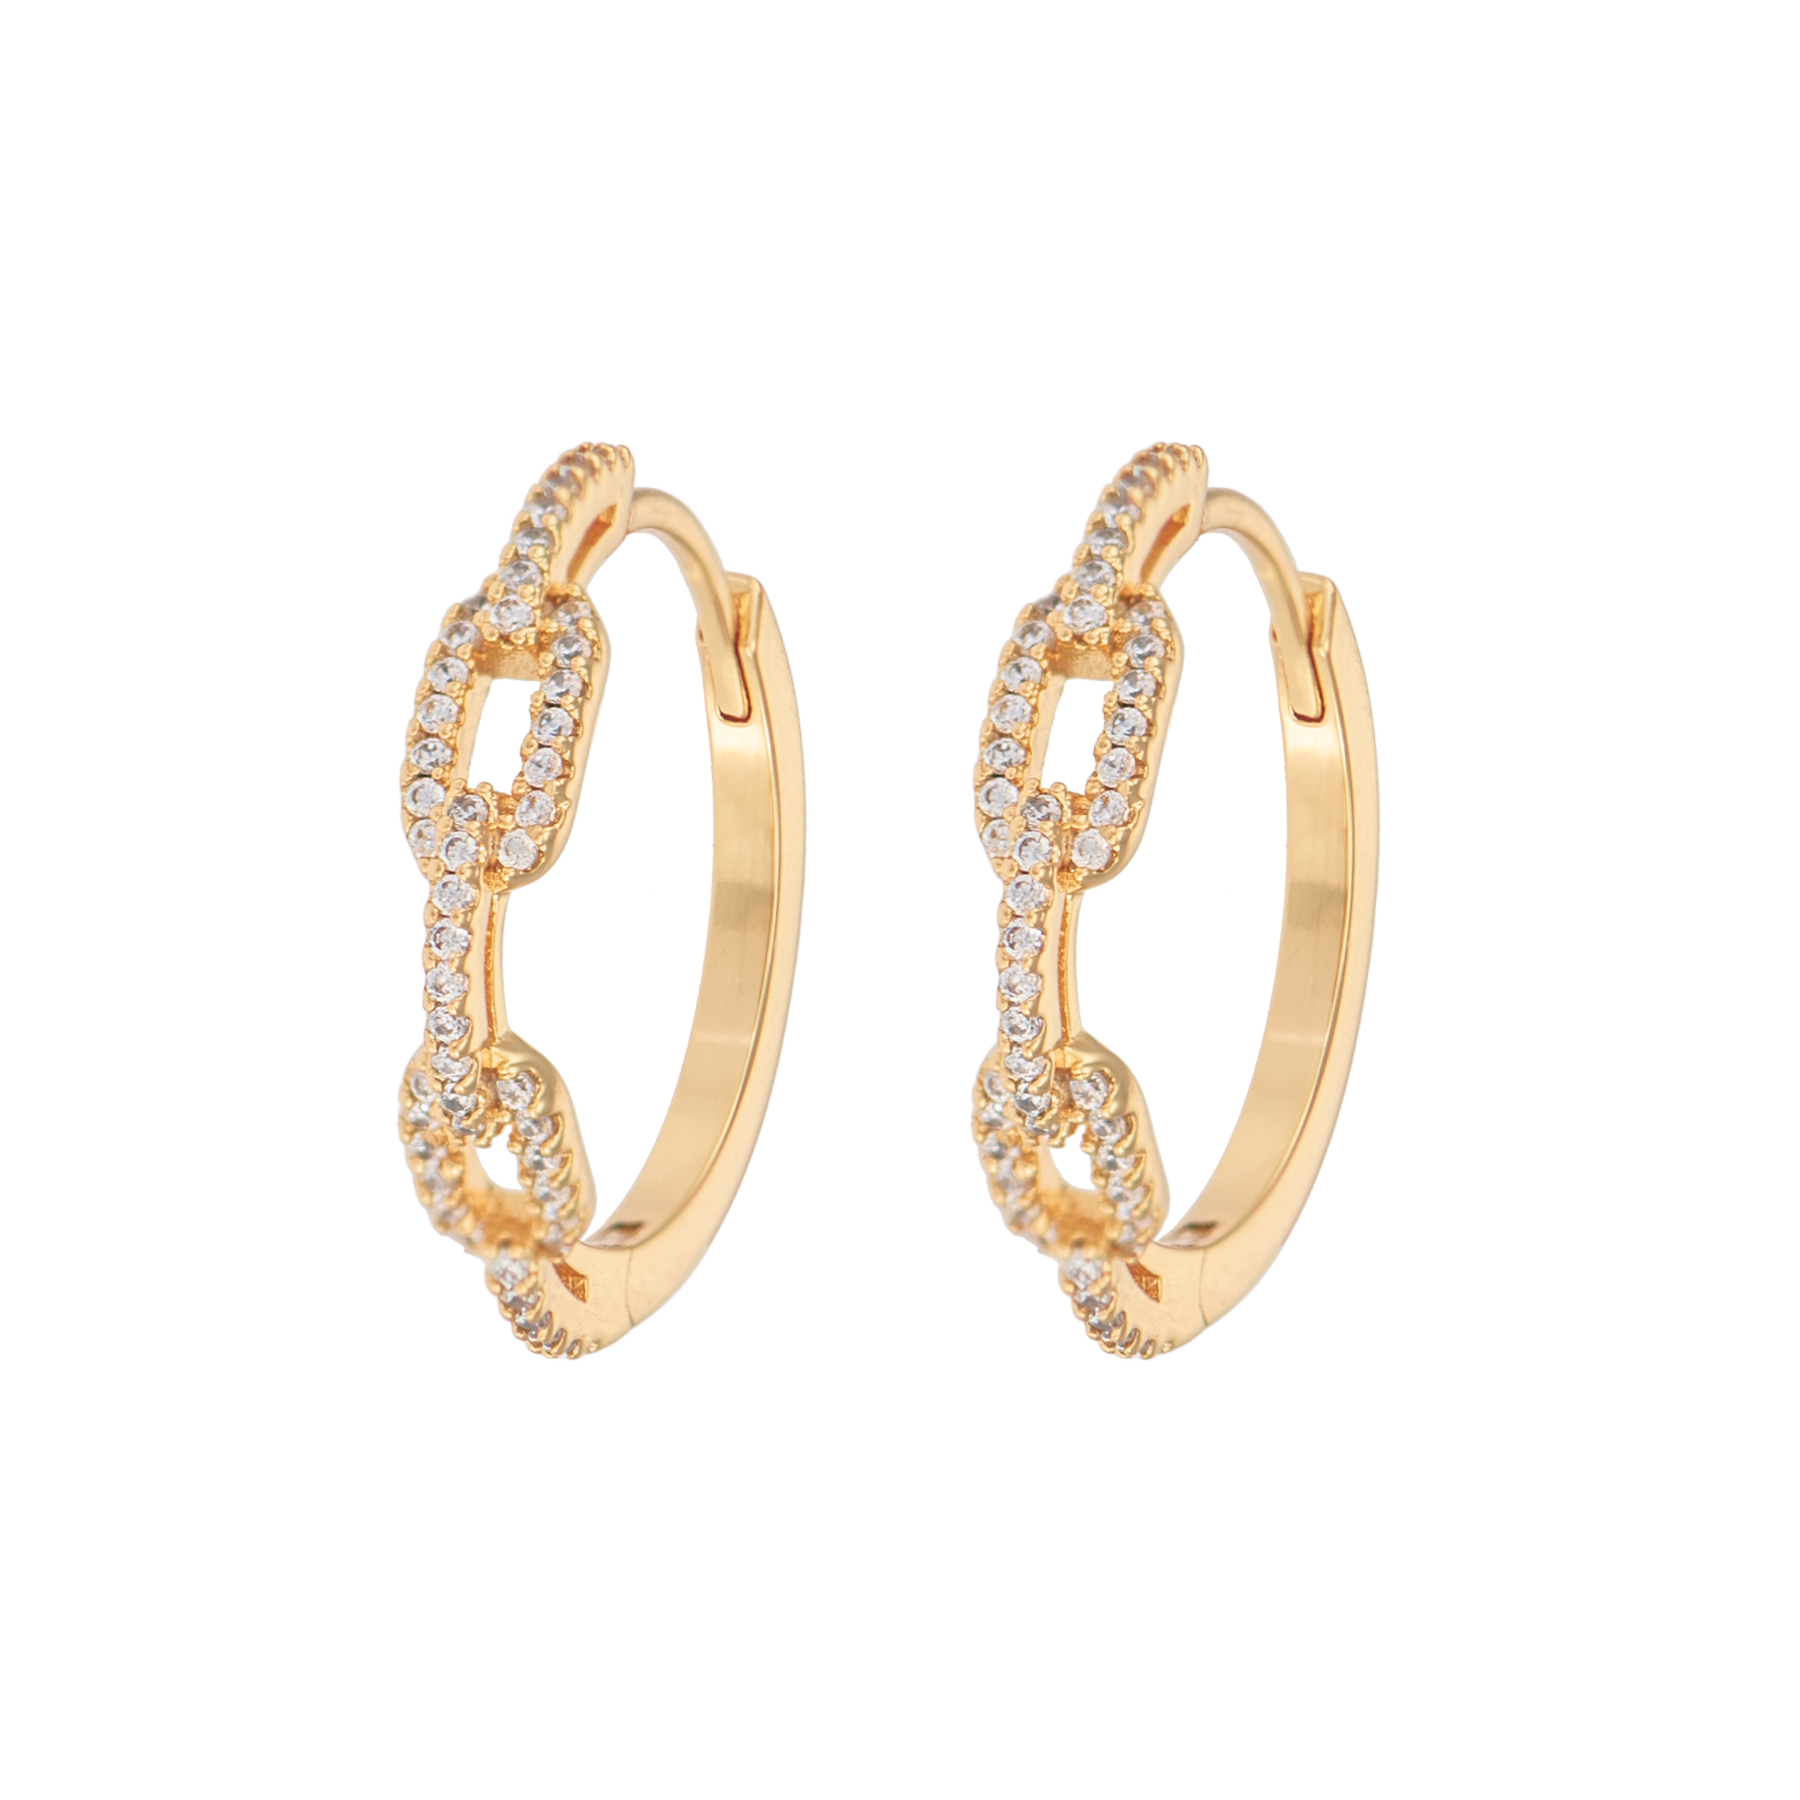 Image of Large Chain hoops from Emilia by Bon Dep